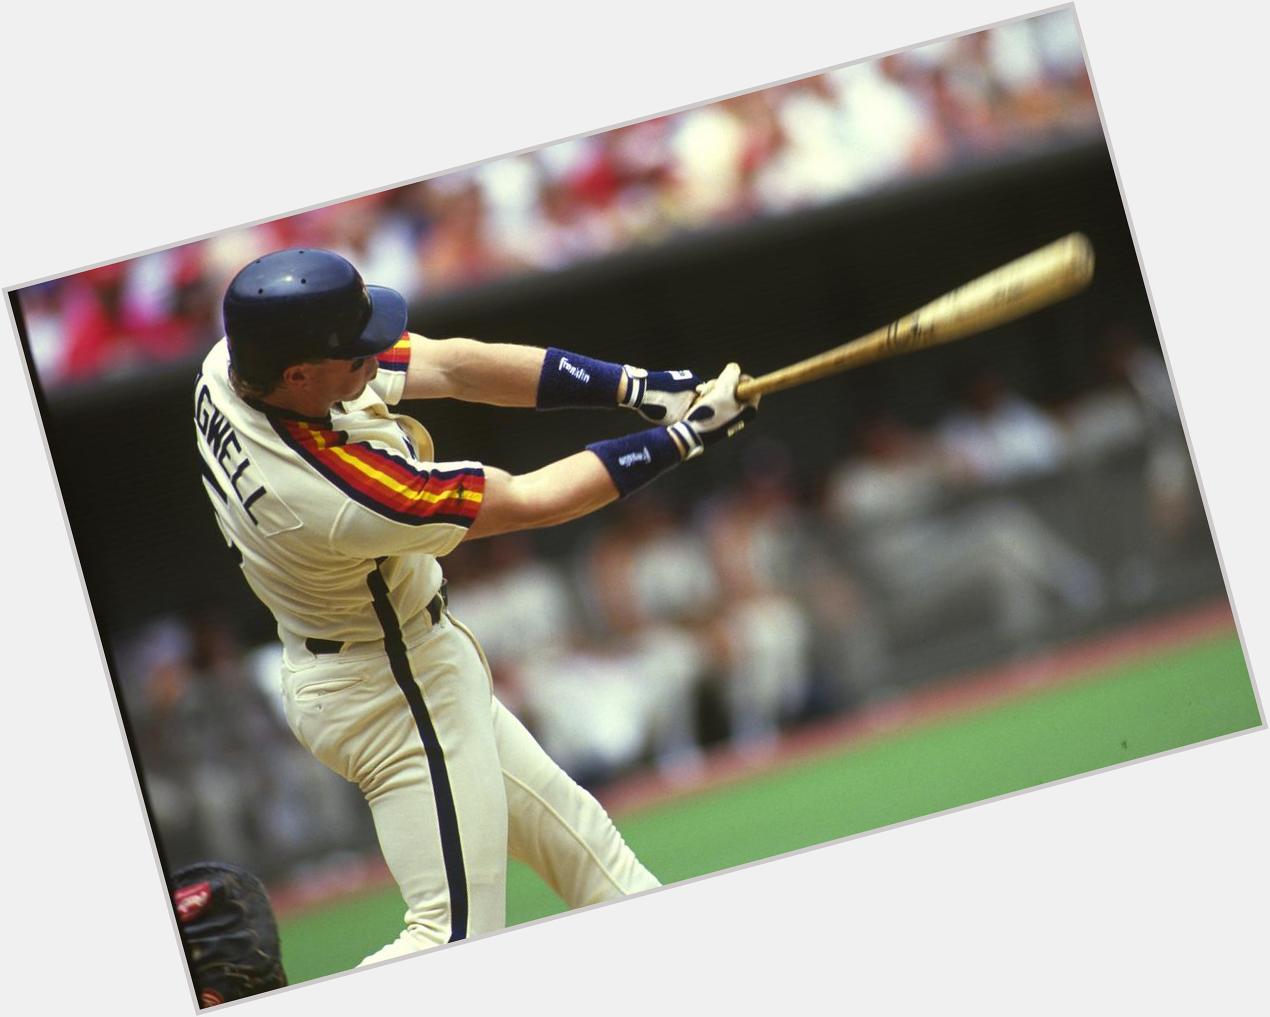 Happy Birthday to Jeff Bagwell, who turns 47 today! 